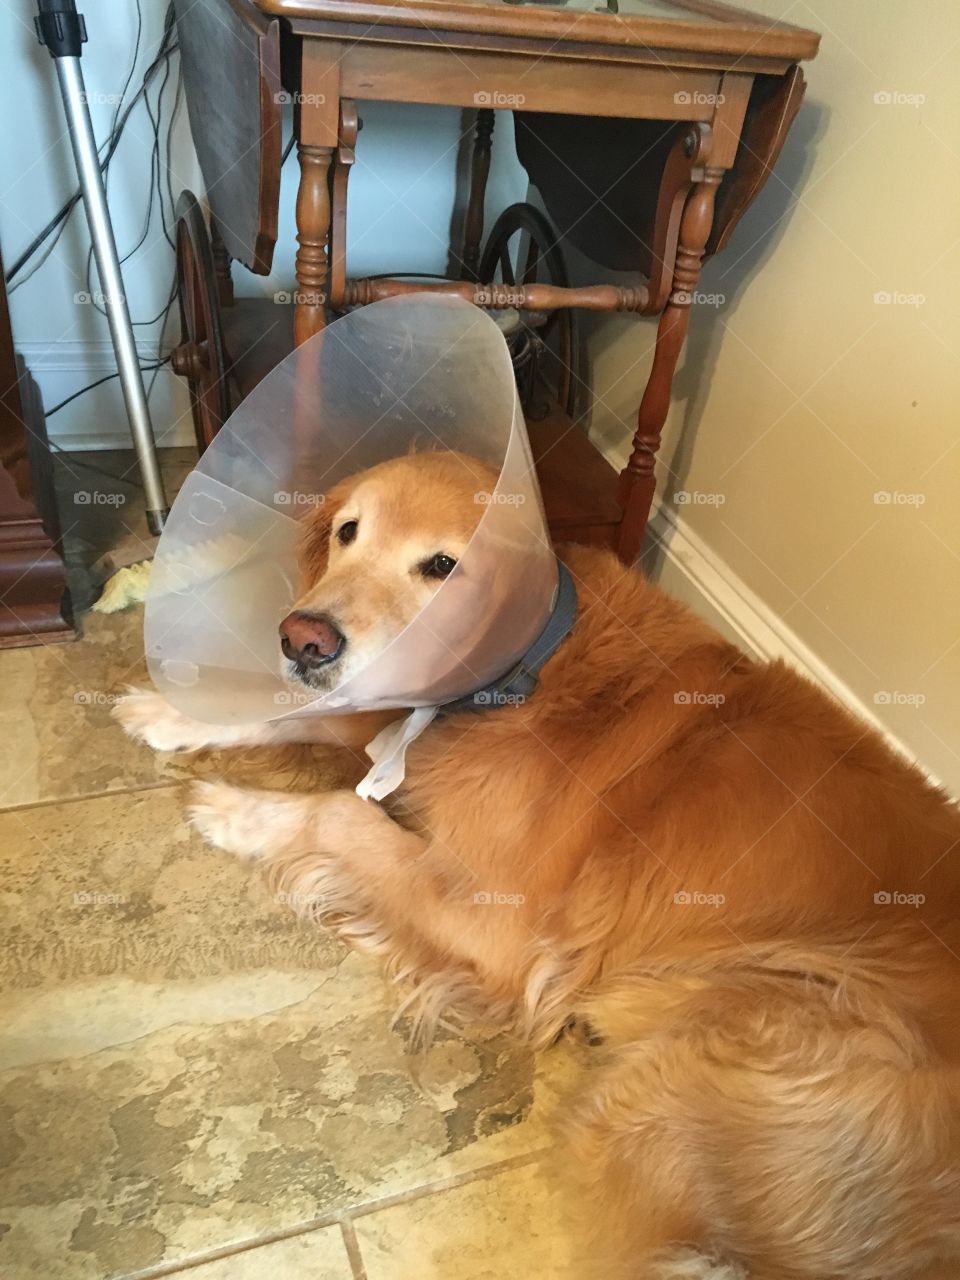 The cone of shame